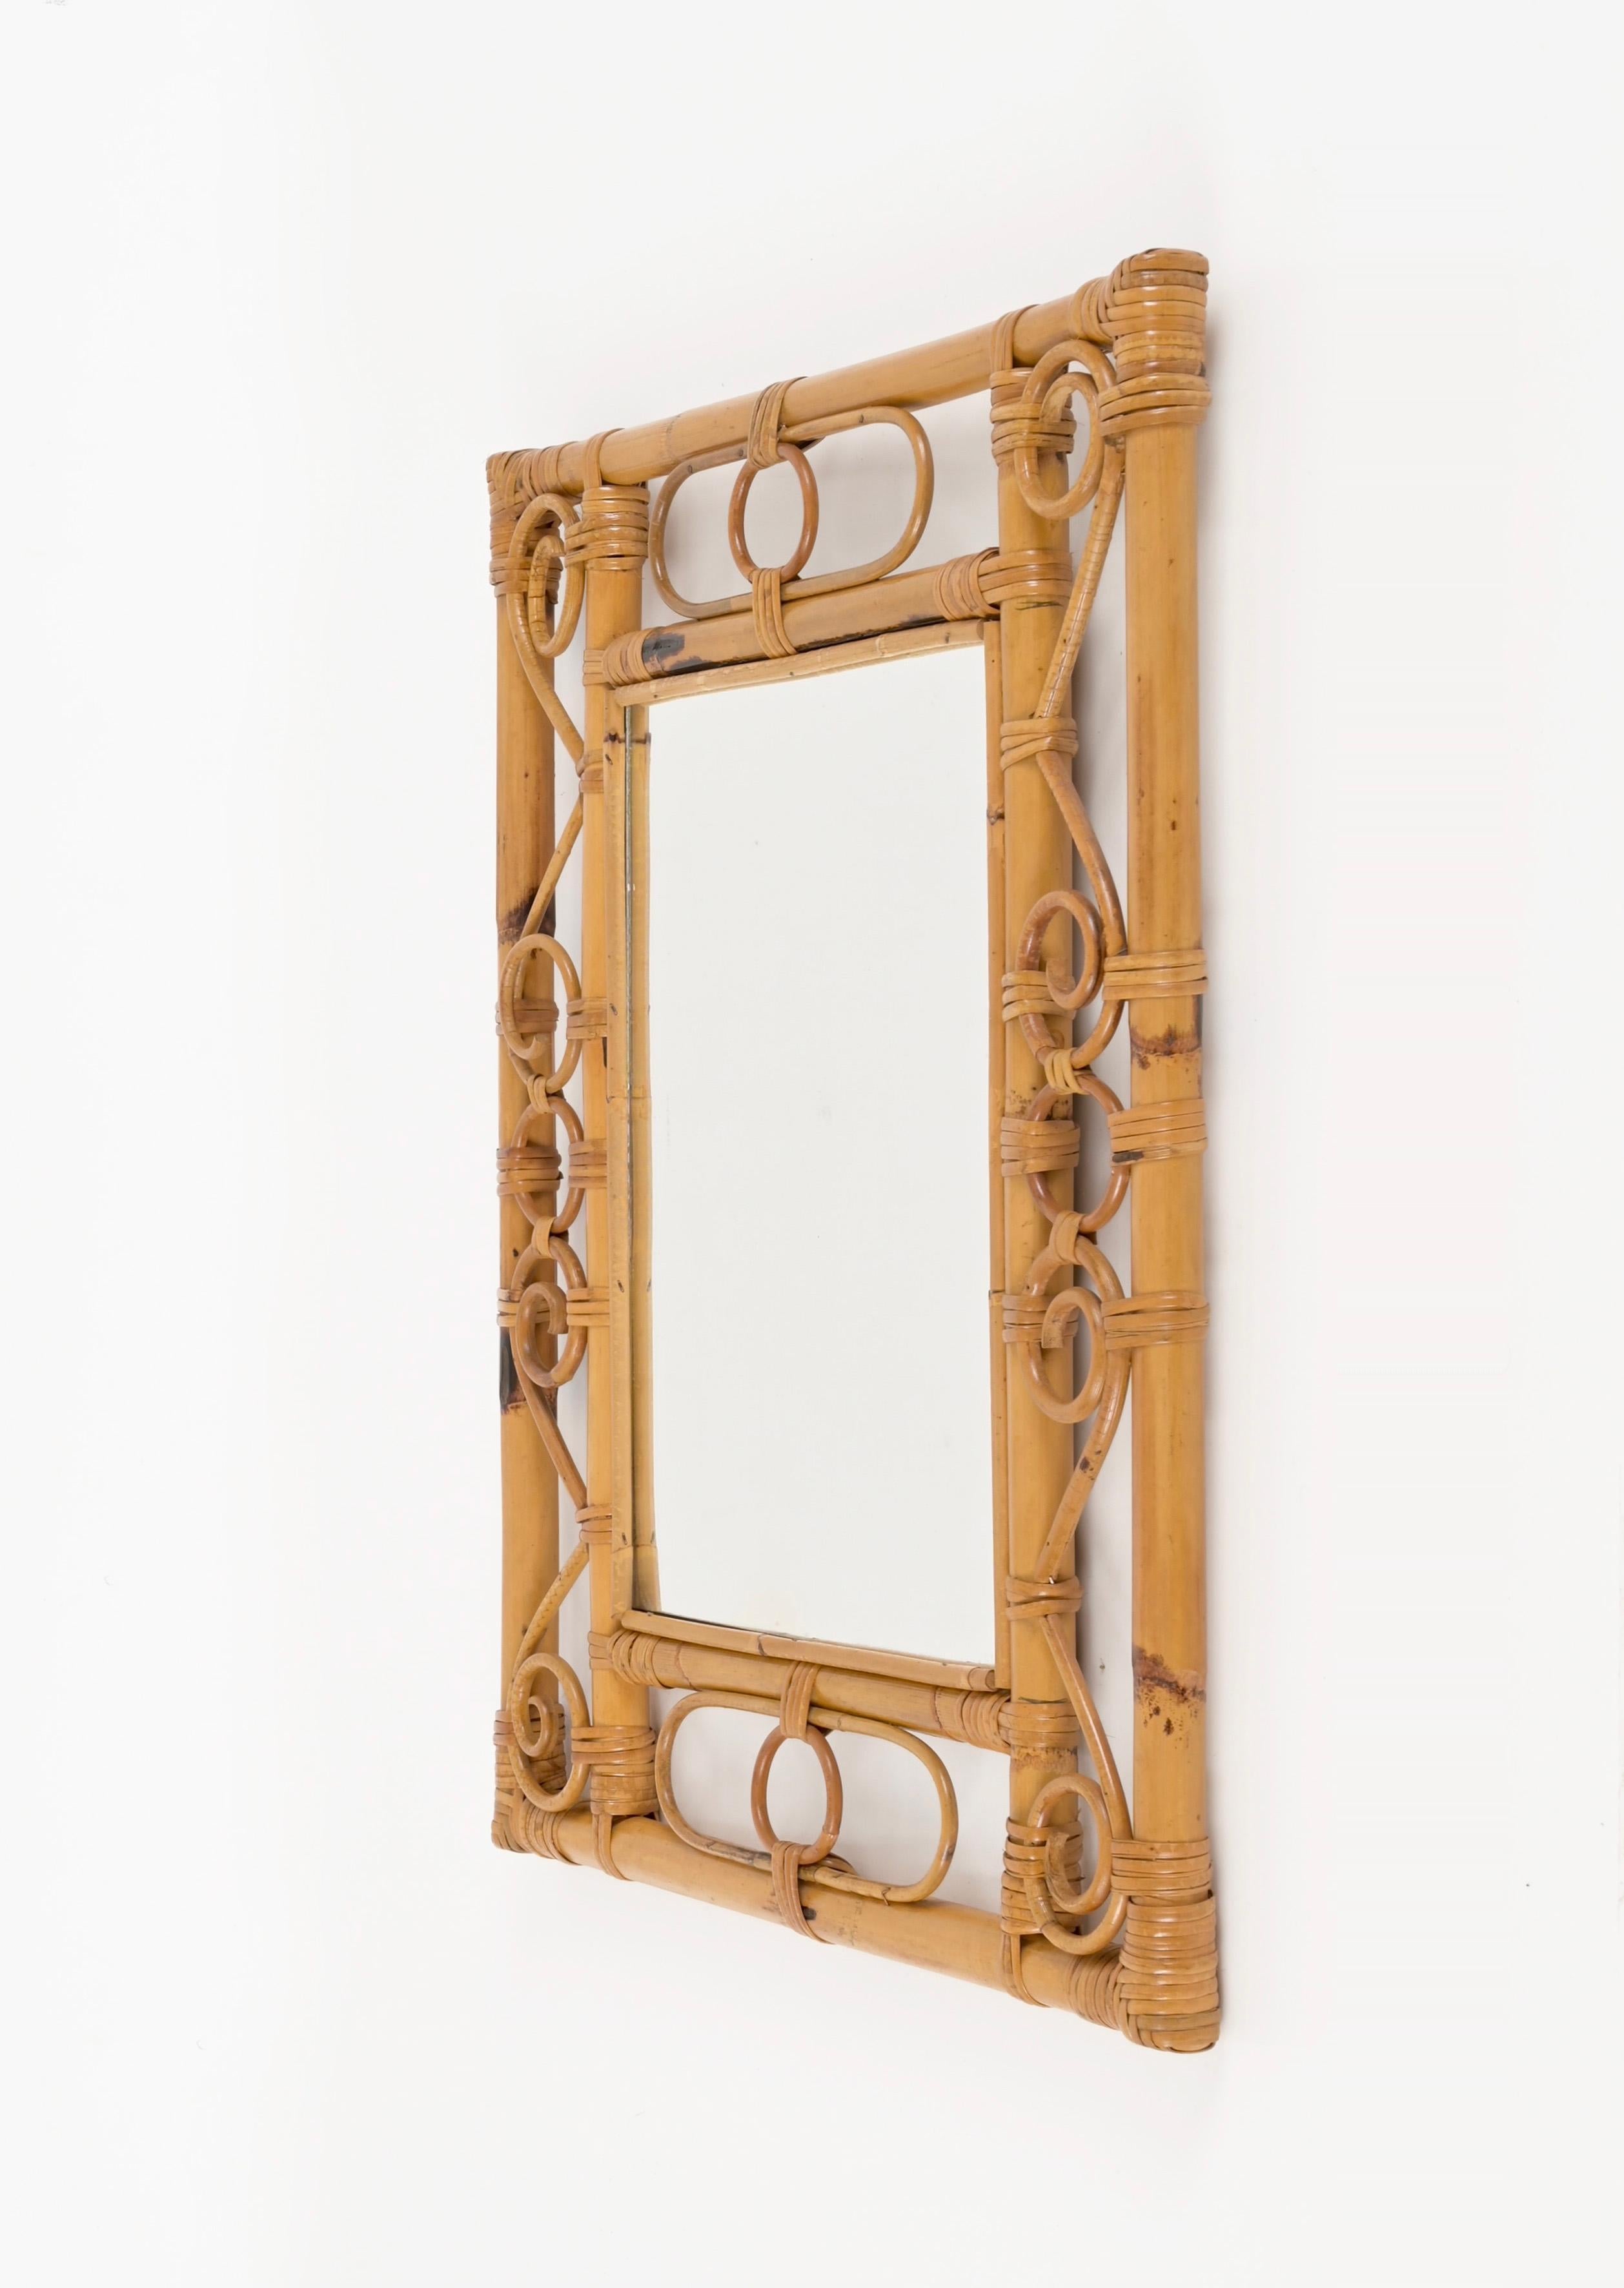 Midcentury French Riviera Bamboo, Rattan, Wicker Rectangular Mirror, Italy 1960s For Sale 6